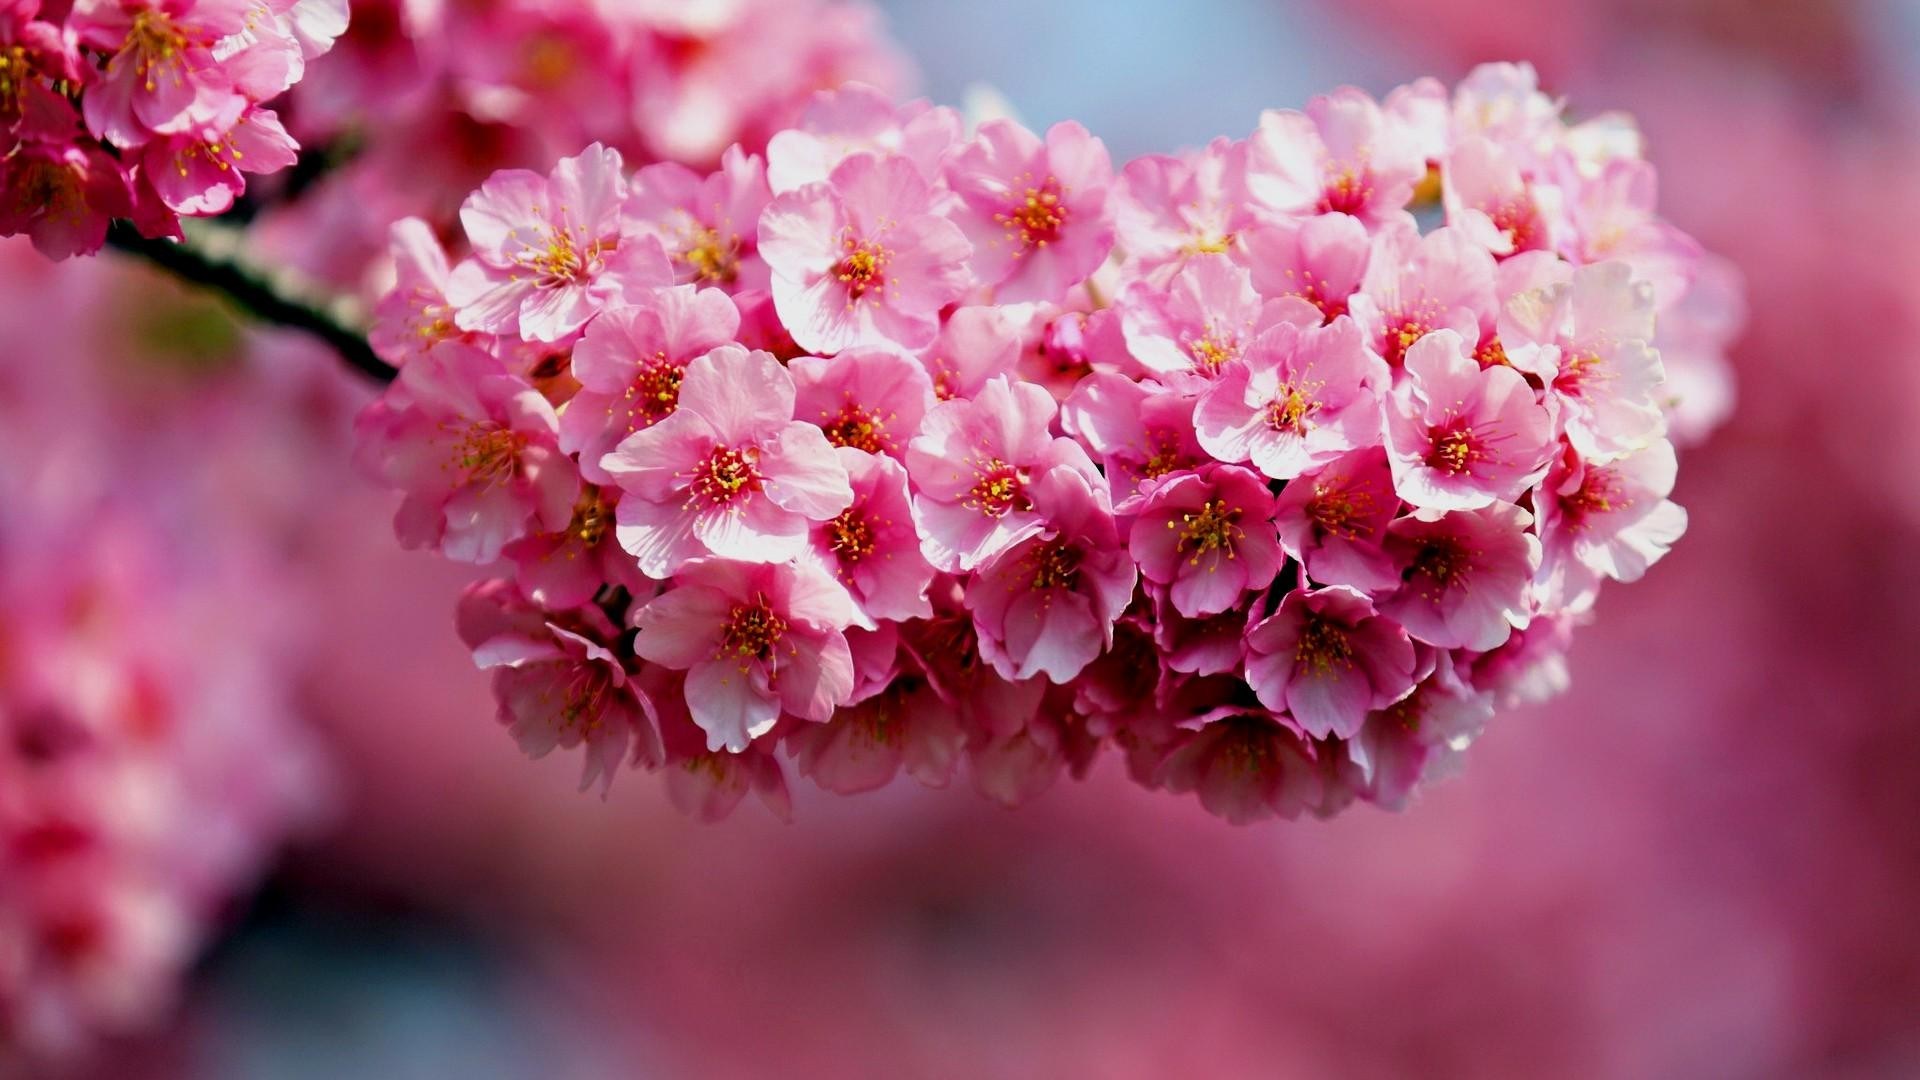 Desktop Background Picture of Flowers with Cherry Blossoms in Summer ...